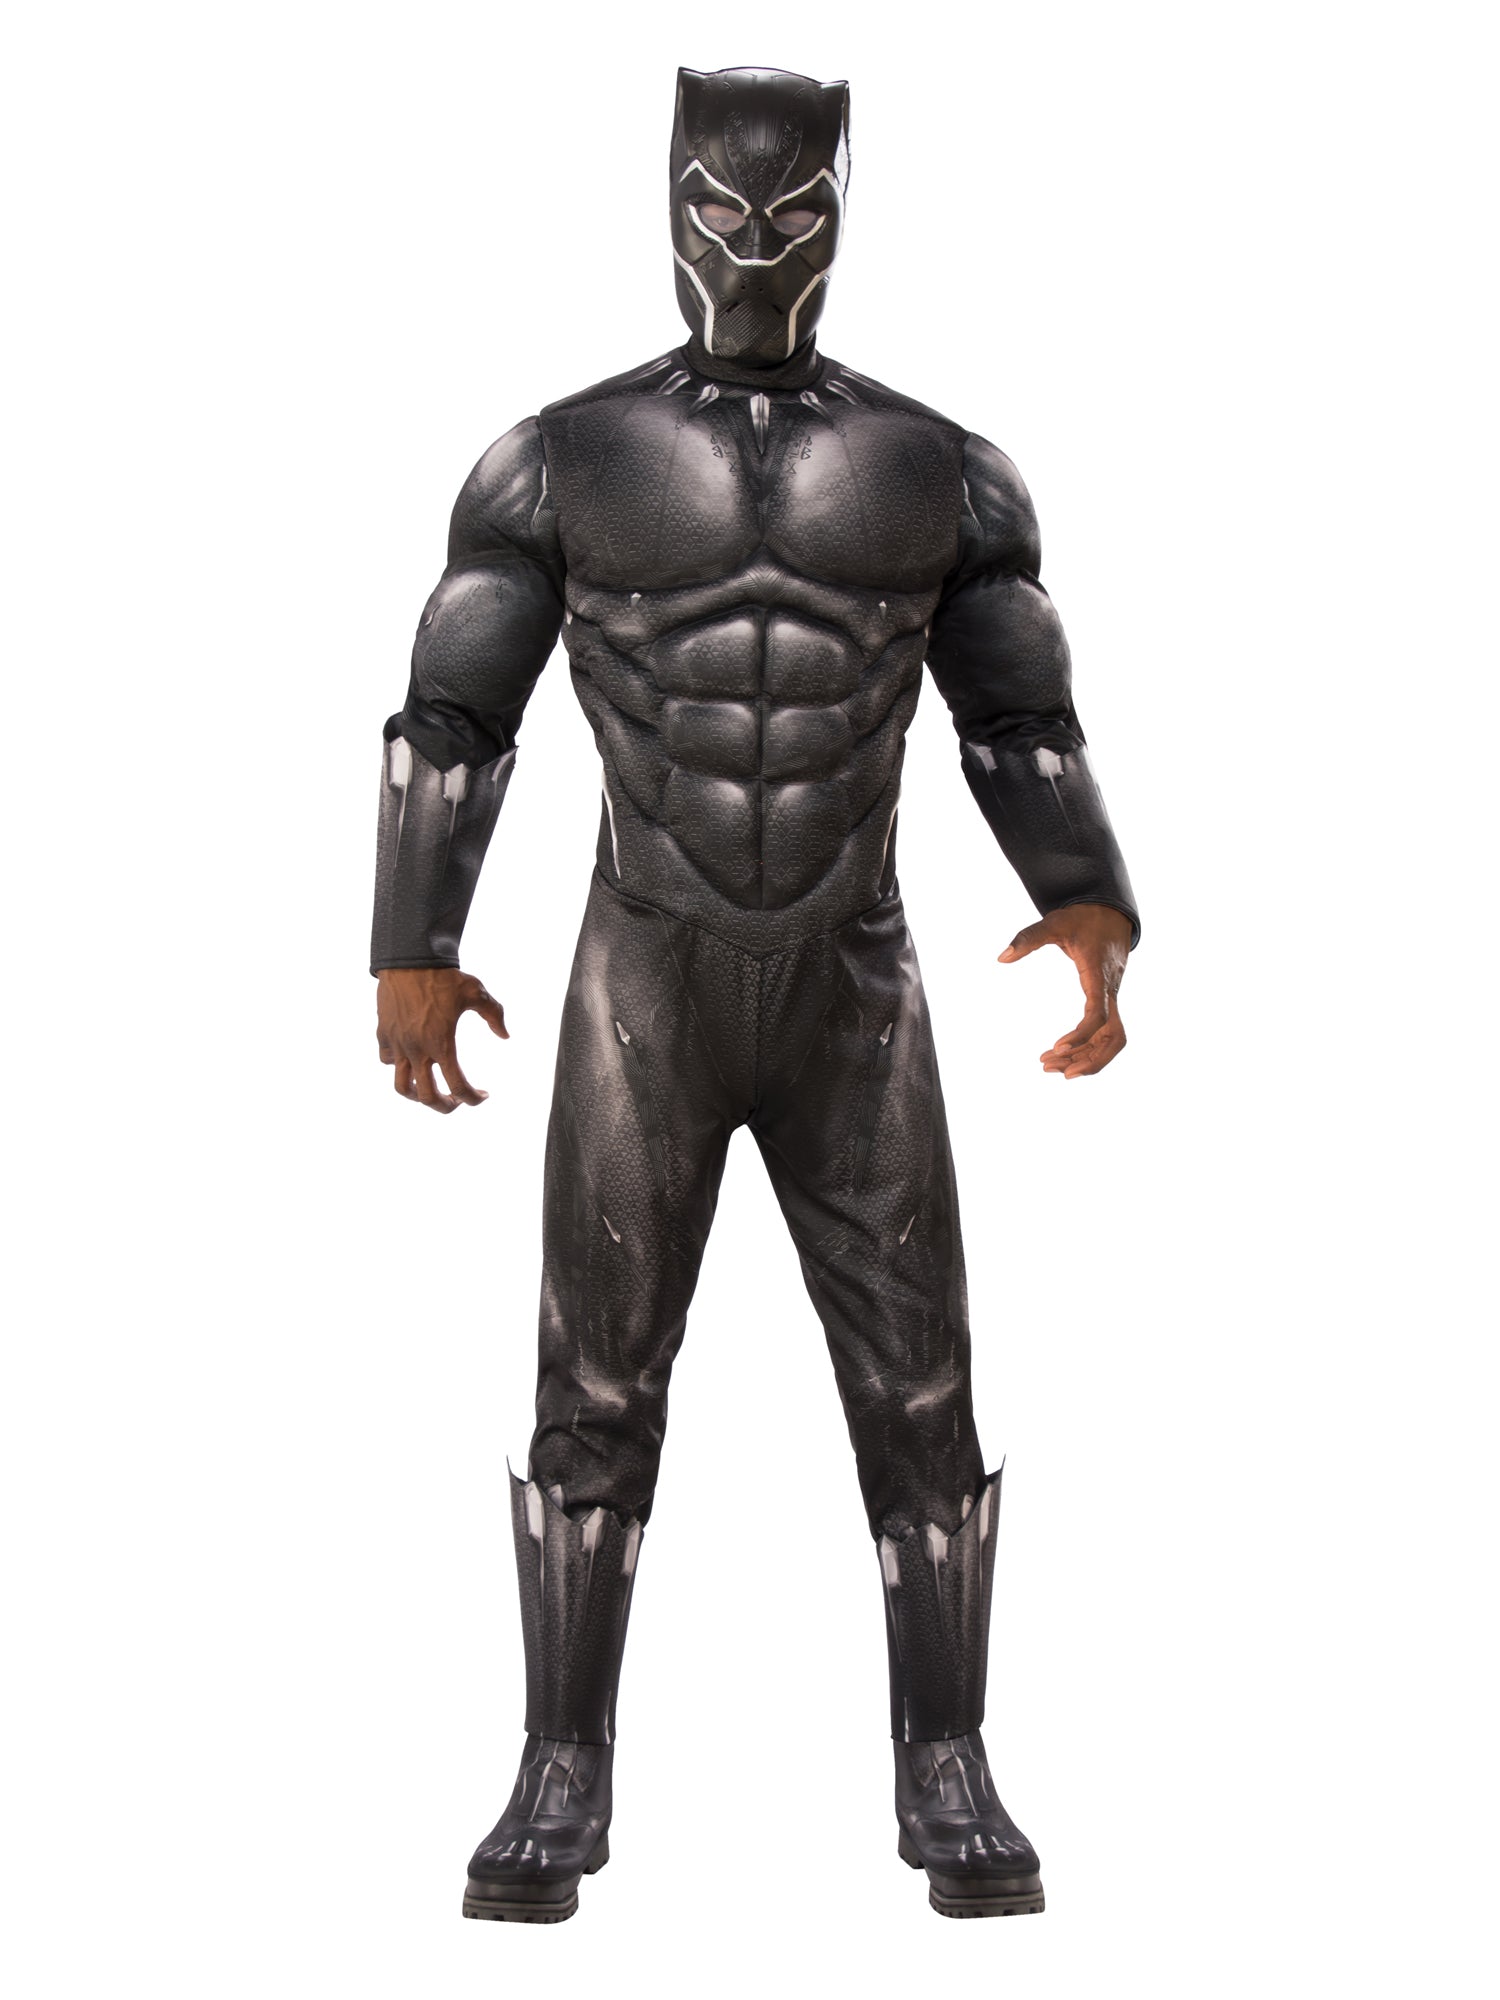 Black Panther, Black Panther, Avengers, Black Panther, Multi, Marvel, Adult Costume, Extra Large, Front